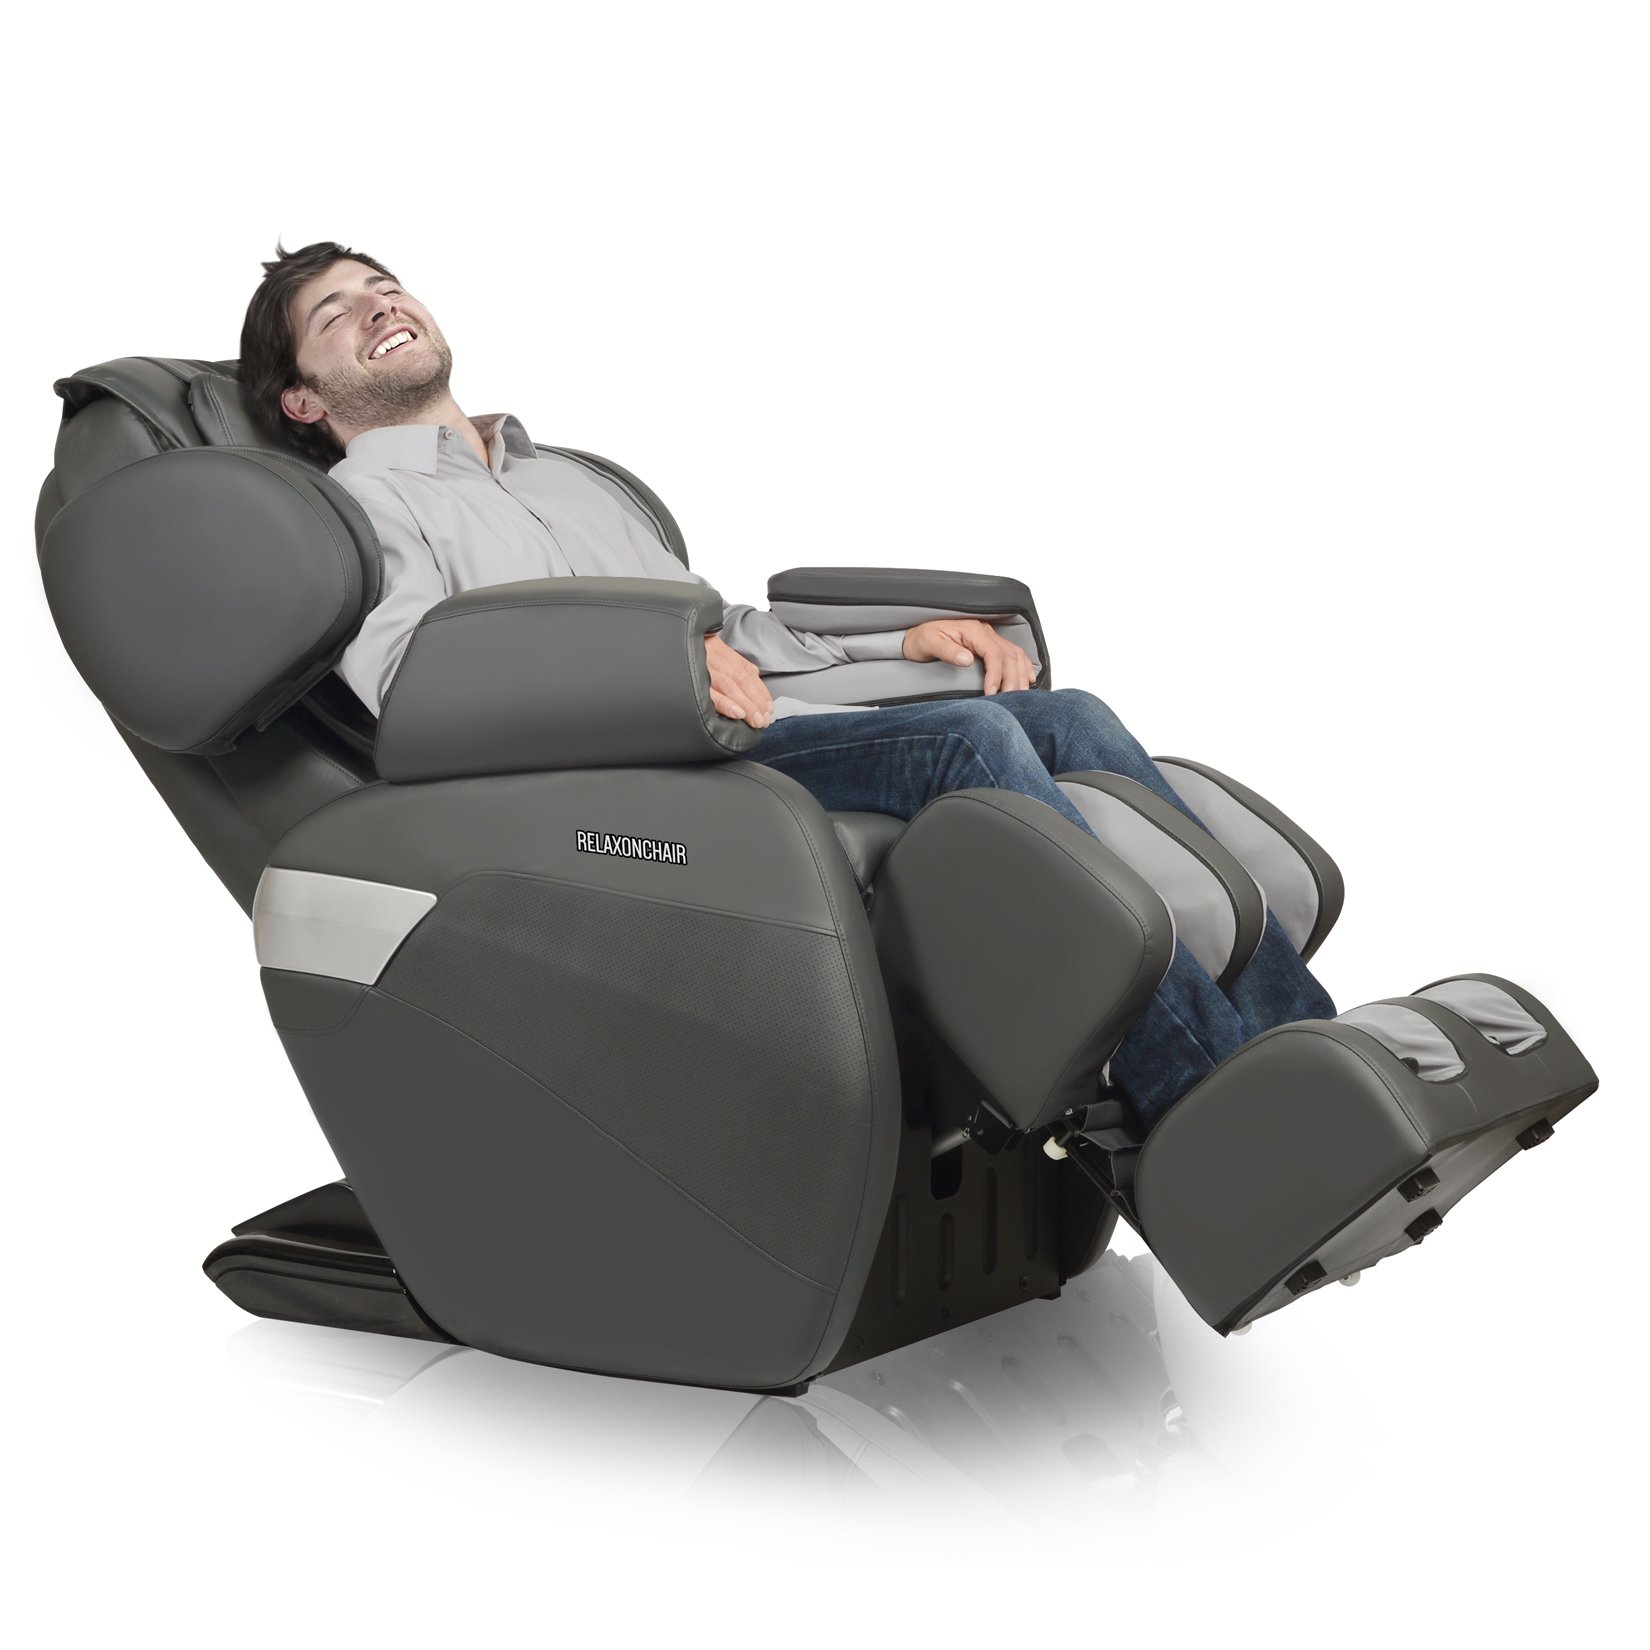 RELAXONCHAIR Full Body Massage Chair, MK-II PLUS - Charcoal (Gray) - image 1 of 8